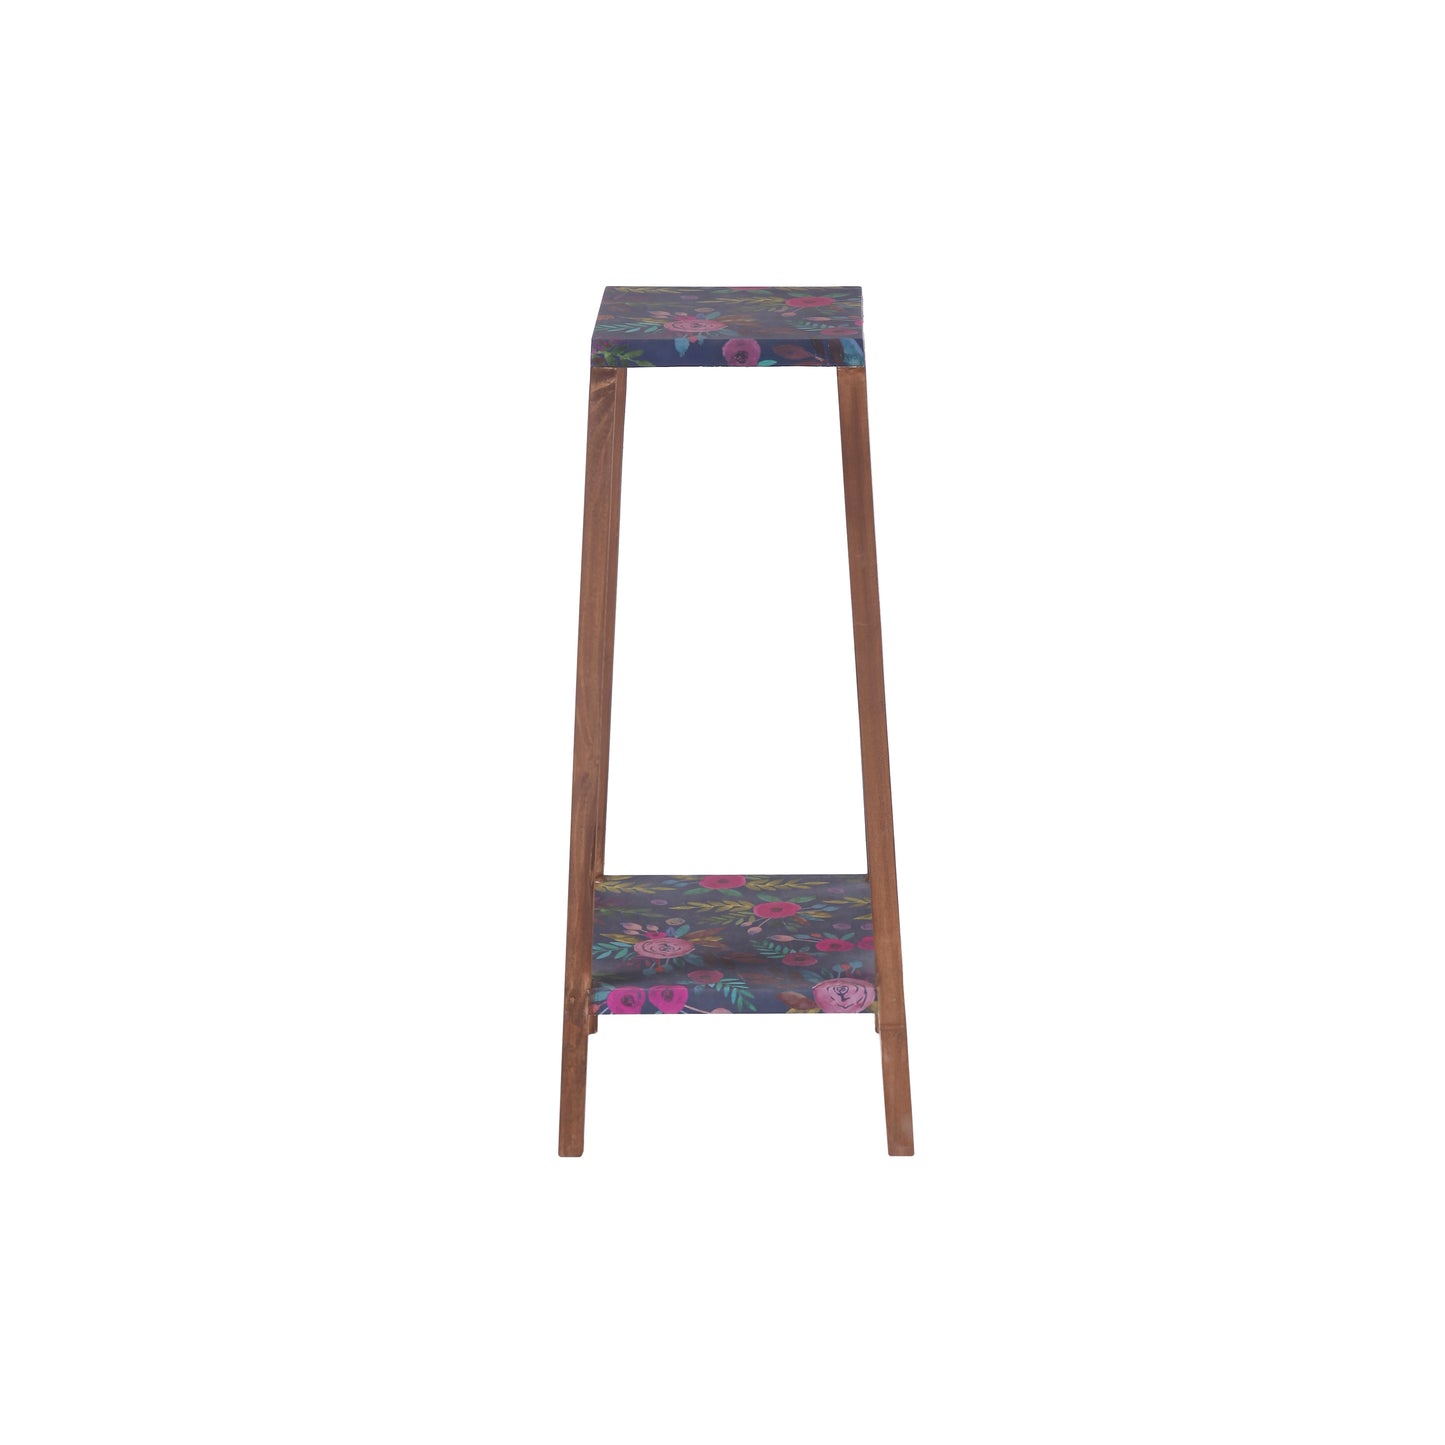 A Tiny Mistake Square Four Legged Tapering Two Tier Decorative Stand (Two Tiers) (Floral Base with Dark Legs)